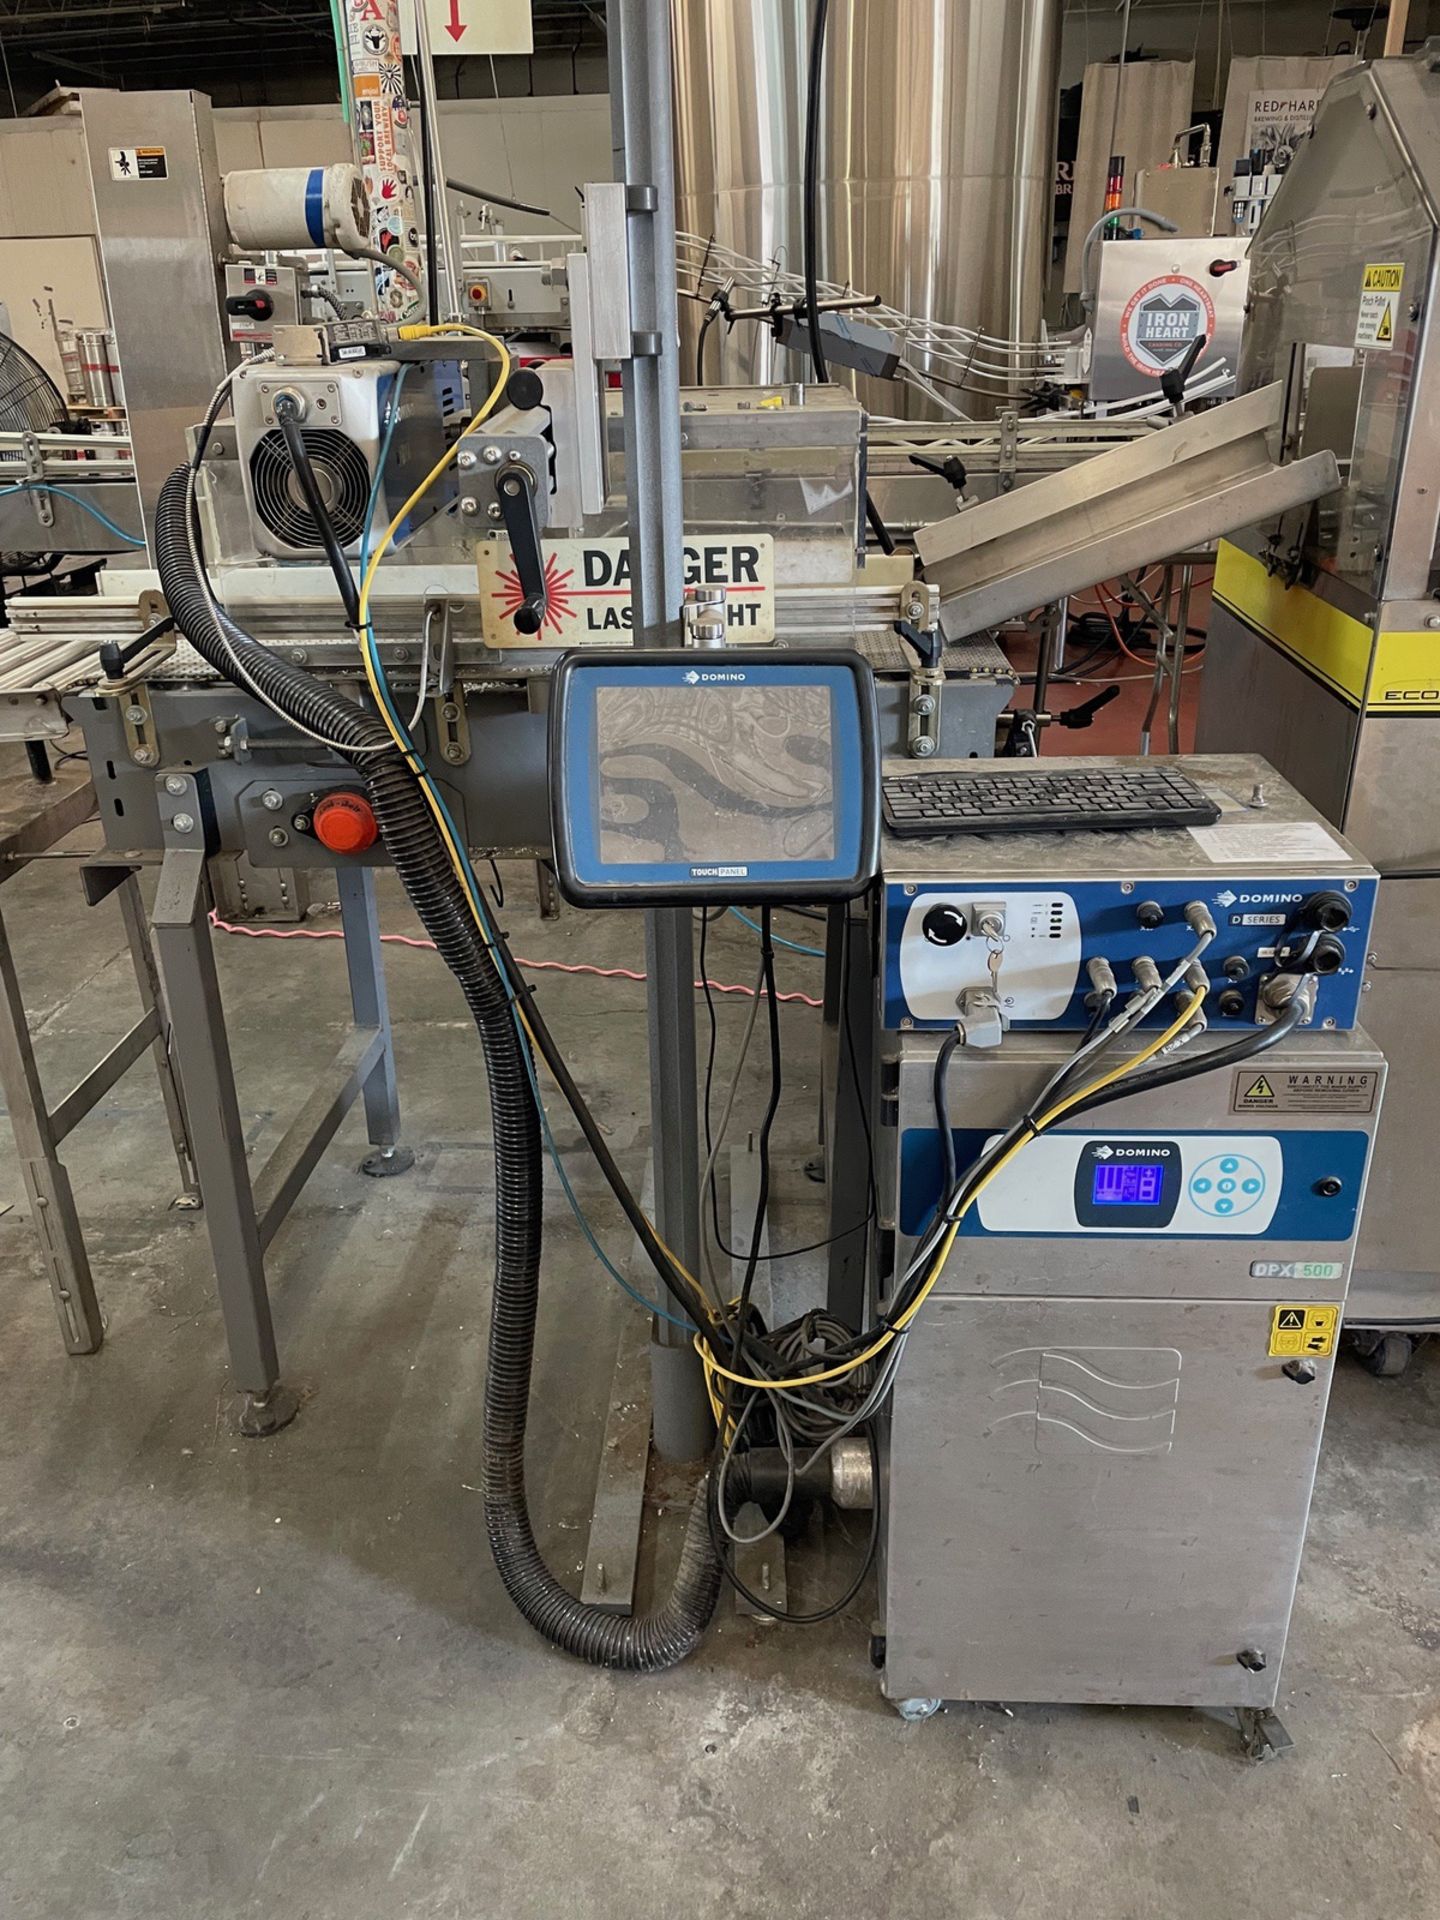 Domino Model D120i, Serial No. S160551MG1111L Laser Coder With Fume Extractor and 4 | Rig Fee $350